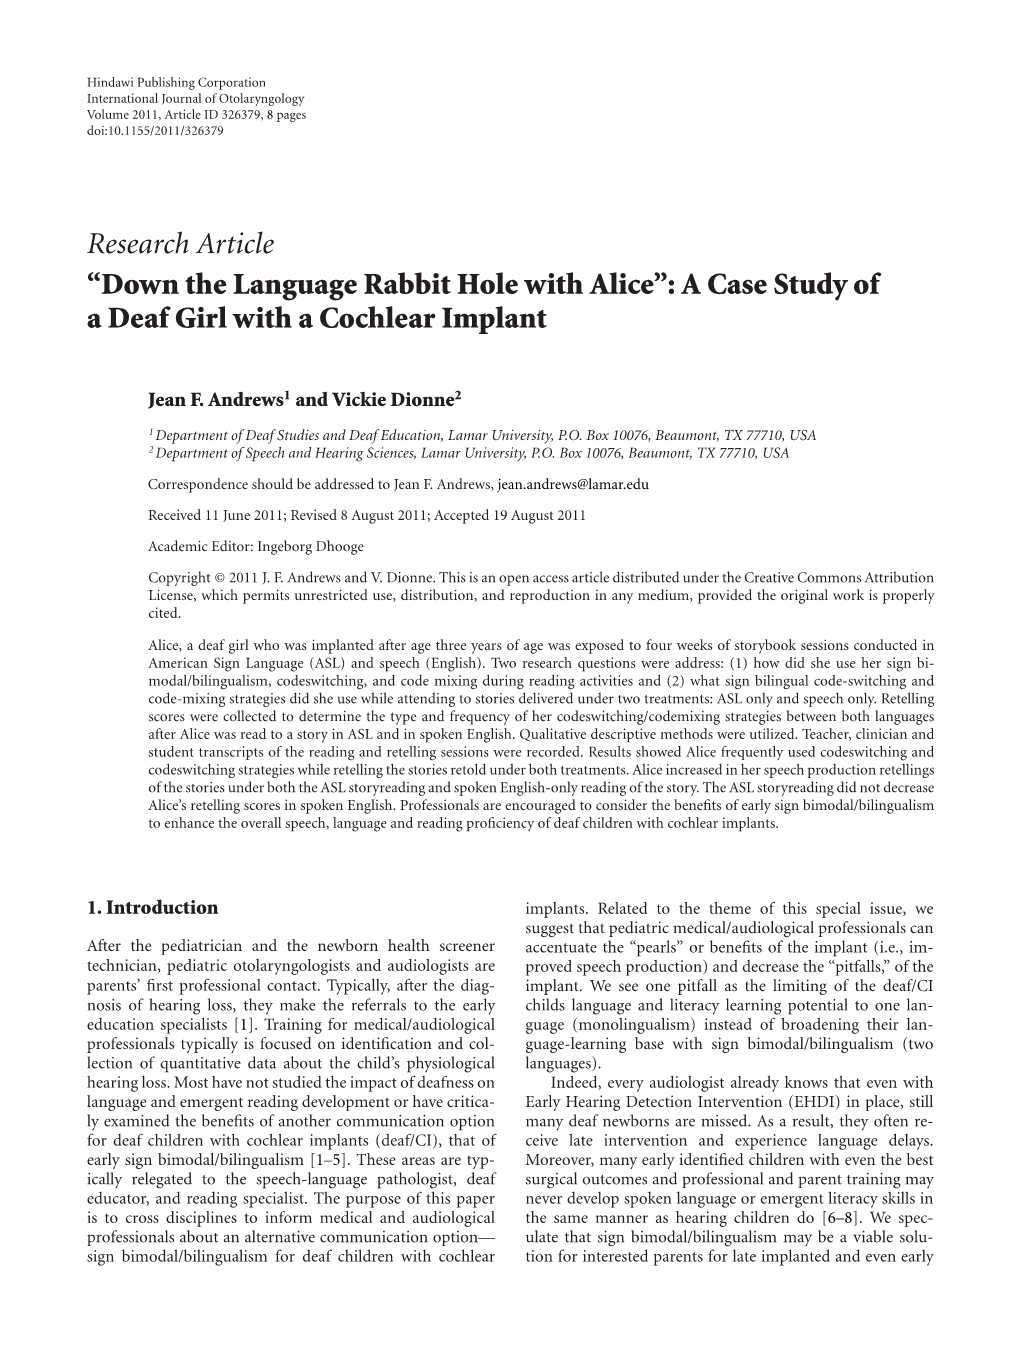 “Down the Language Rabbit Hole with Alice”: a Case Study of a Deaf Girl with a Cochlear Implant